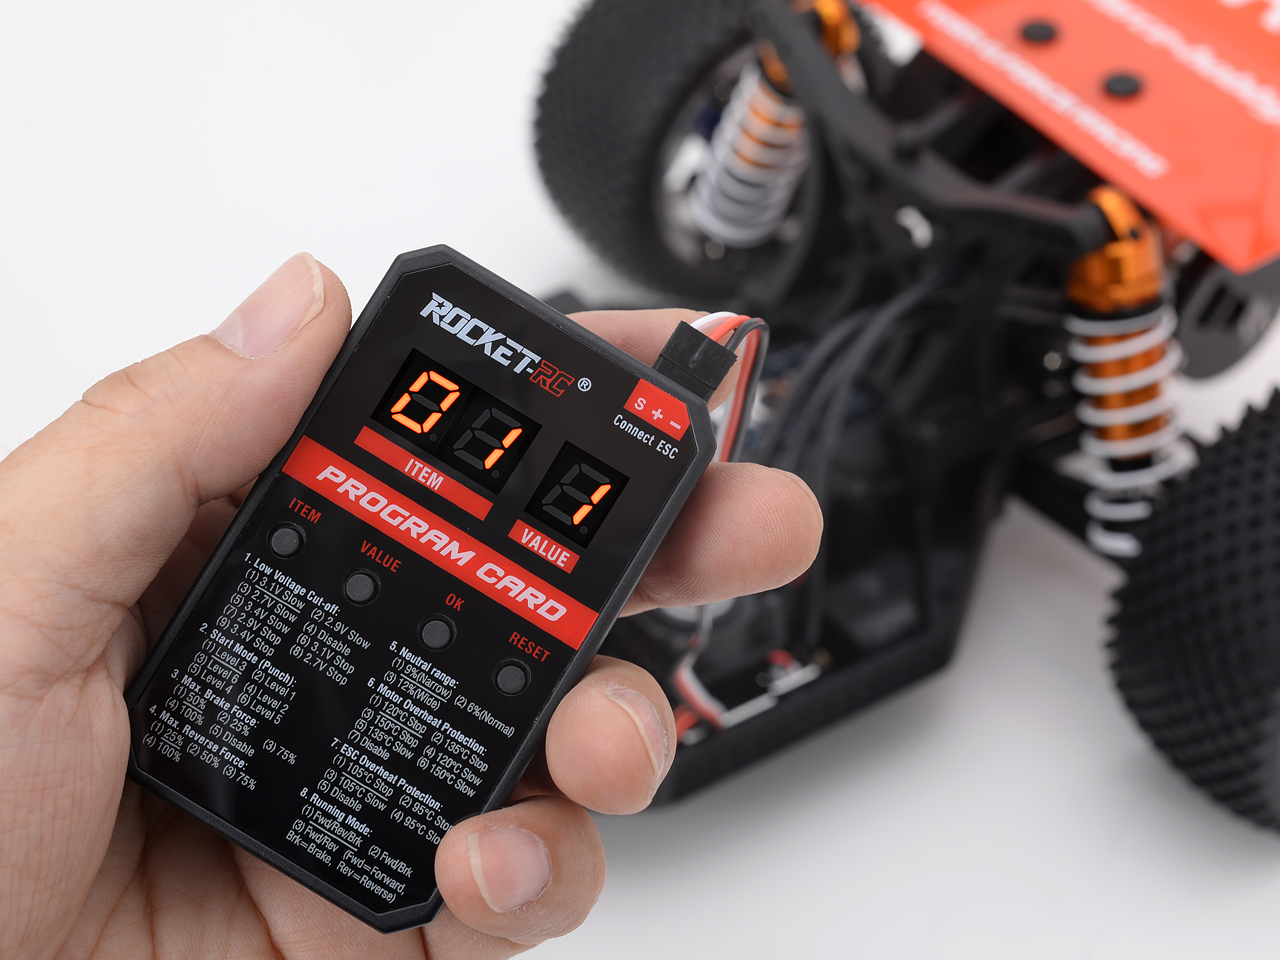 G-FORCE Surpass Rocket サーパス・ロケット80A ESC D-Connector SPH806